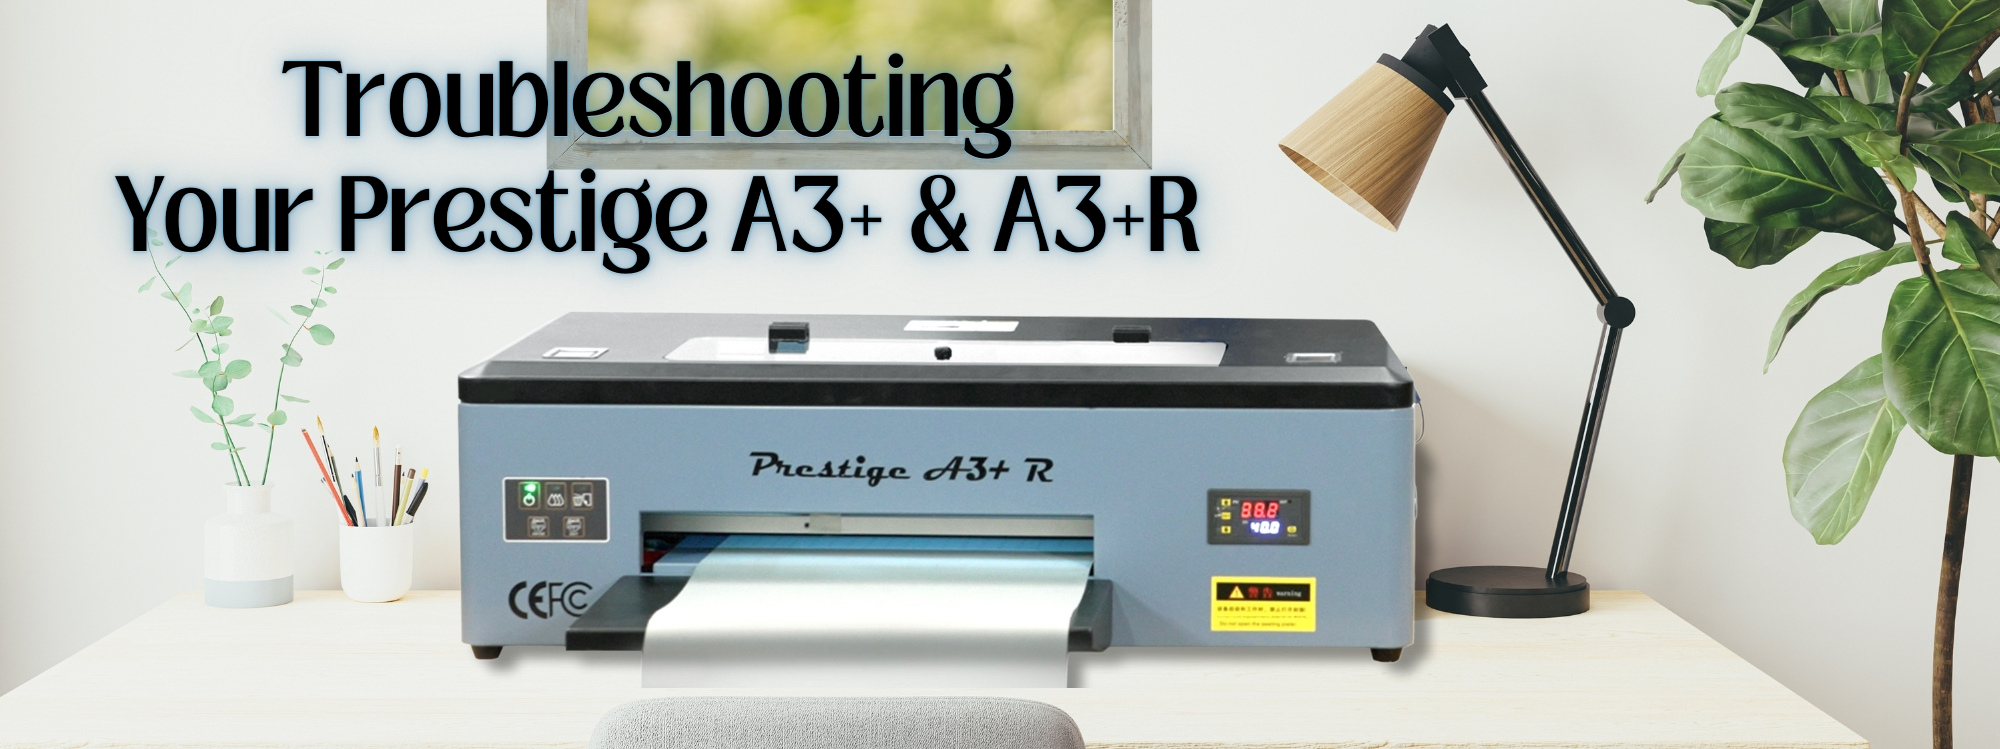 Troubleshooting the Prestige A3+ & DTF Printers– Swing Design